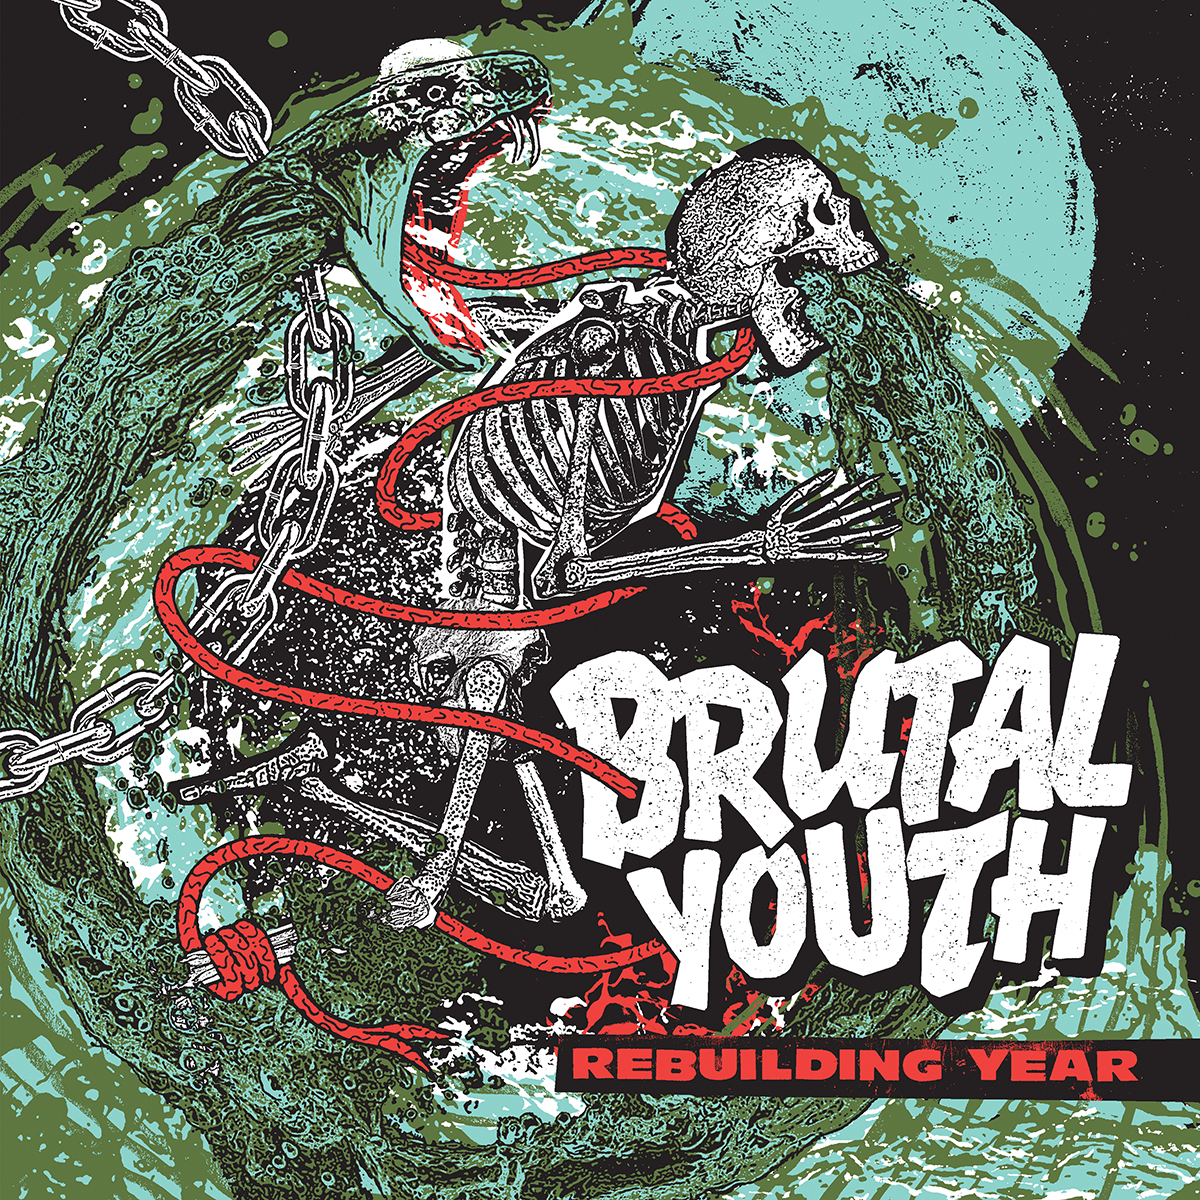 Toronto's Brutal Youth Release New Record REBUILDING YEAR 